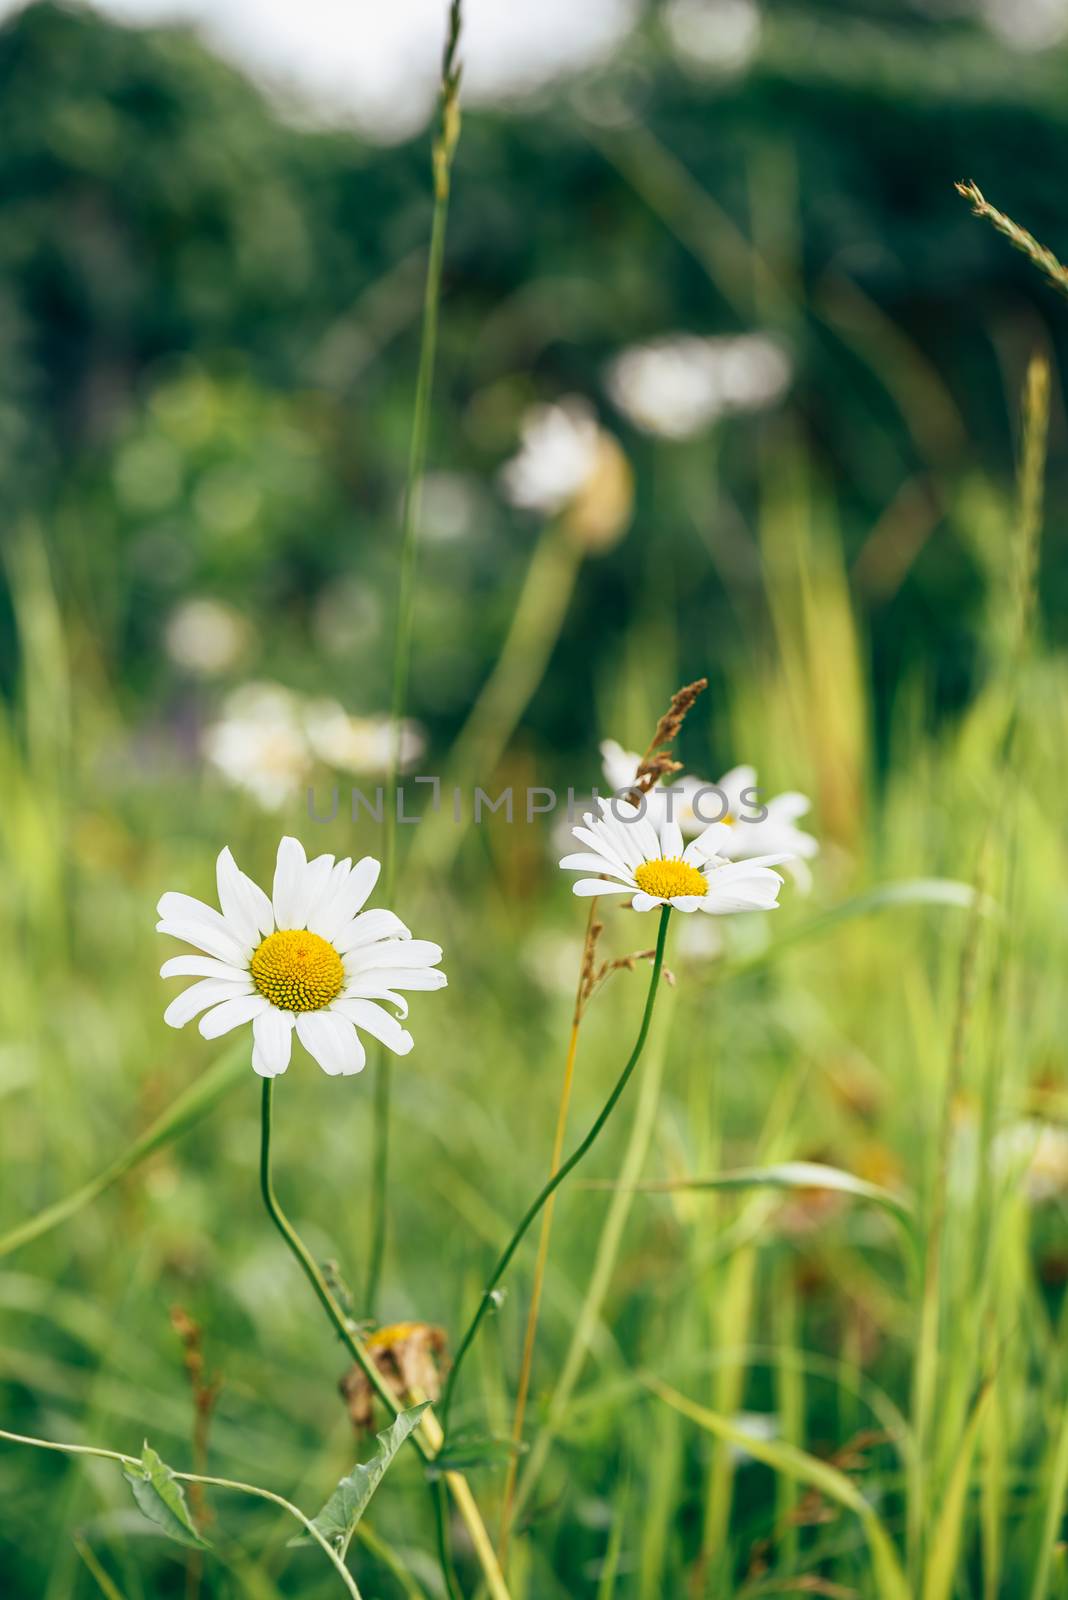 Daisy Flowers on Garden Lawn at Sunny Day. Blurred Background.